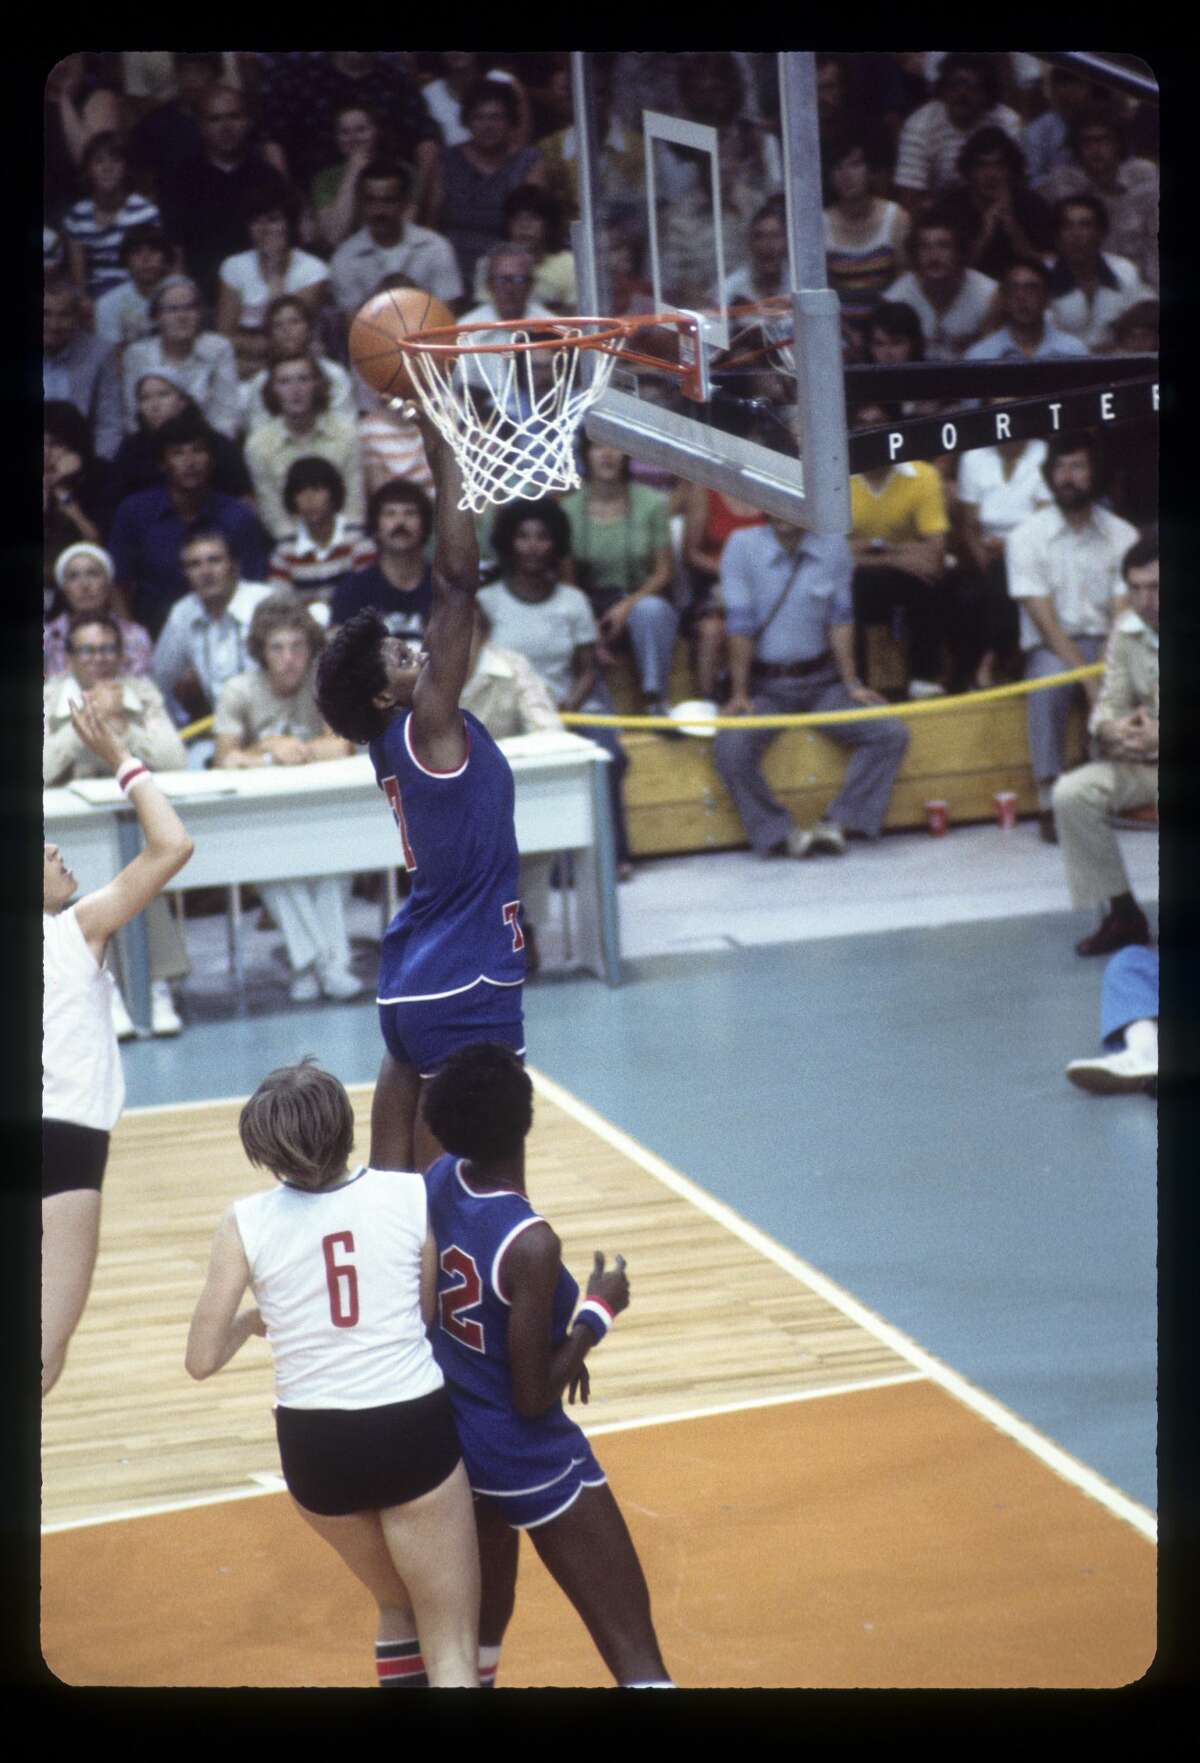 Walt Disney Television via Getty Images SPORTS - 1976 SUMMER OLYMPICS - Women's Basketball - The 1976 Summer Olympic Games aired on the Walt Disney Television via Getty Images Television Network from July 17 to August 1, 1976. Shoot Date: July 20, 1976. (Photo by ABC Photo Archives/Disney General Entertainment Content via Getty Images) LUSIA HARRIS (USA, DUNKING), WOMEN'S BASKETBALL (USA VS. BULGARIA)